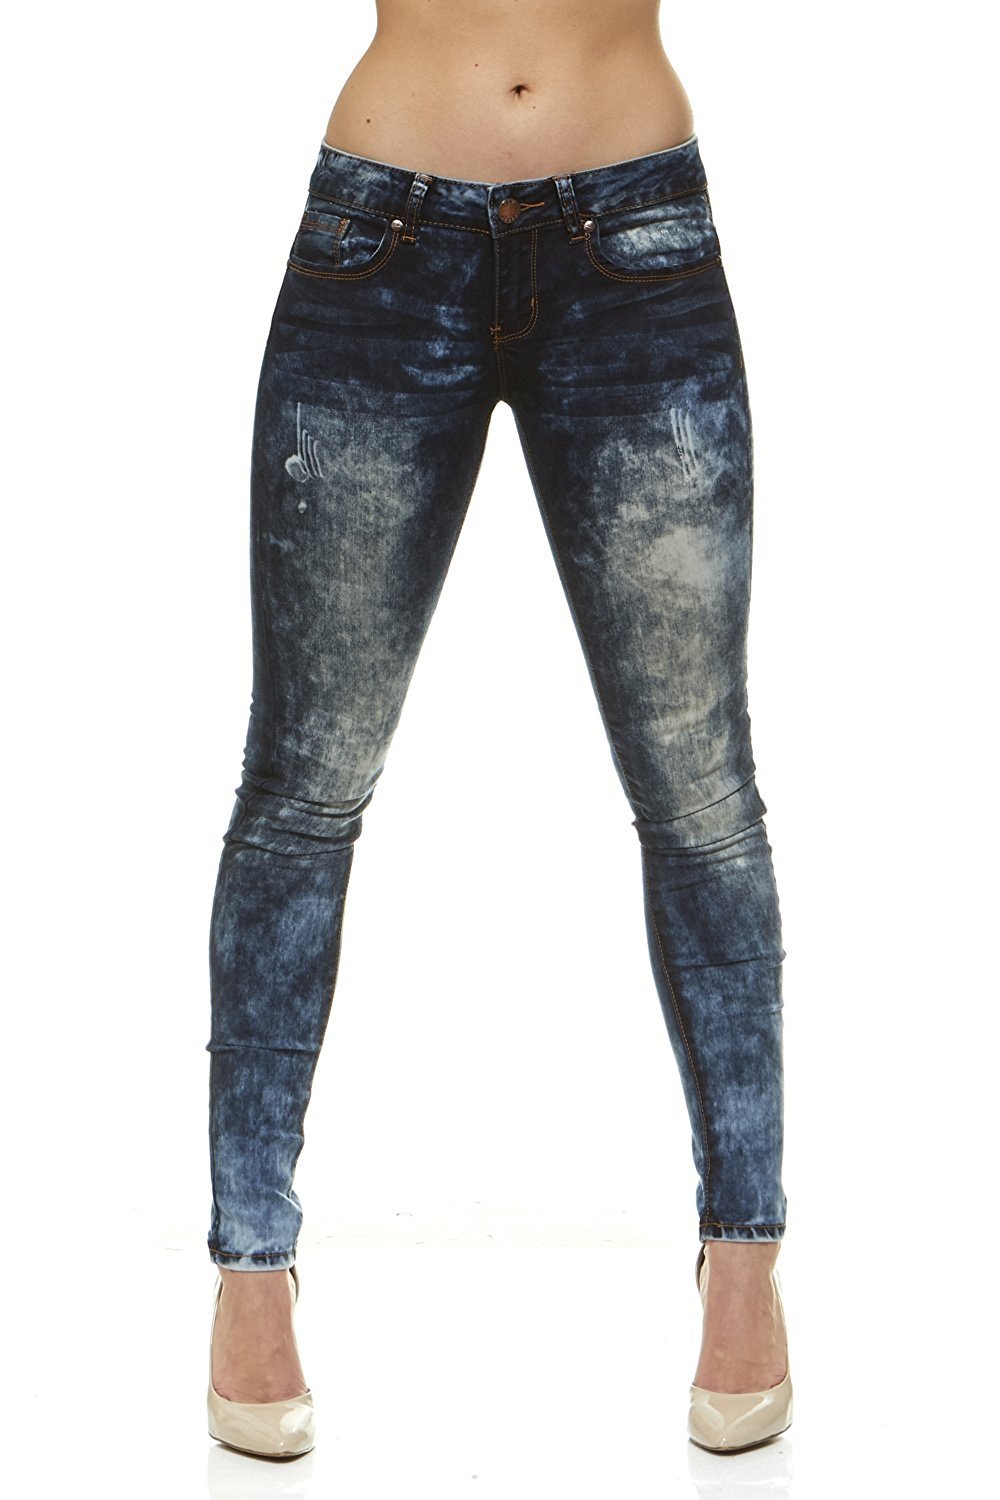 VIP JEANS Classic Skinny Jeans For Teen Girls Slim Fit Stretch Stone Washed Jeans In Junior or Plus Size - image 1 of 10